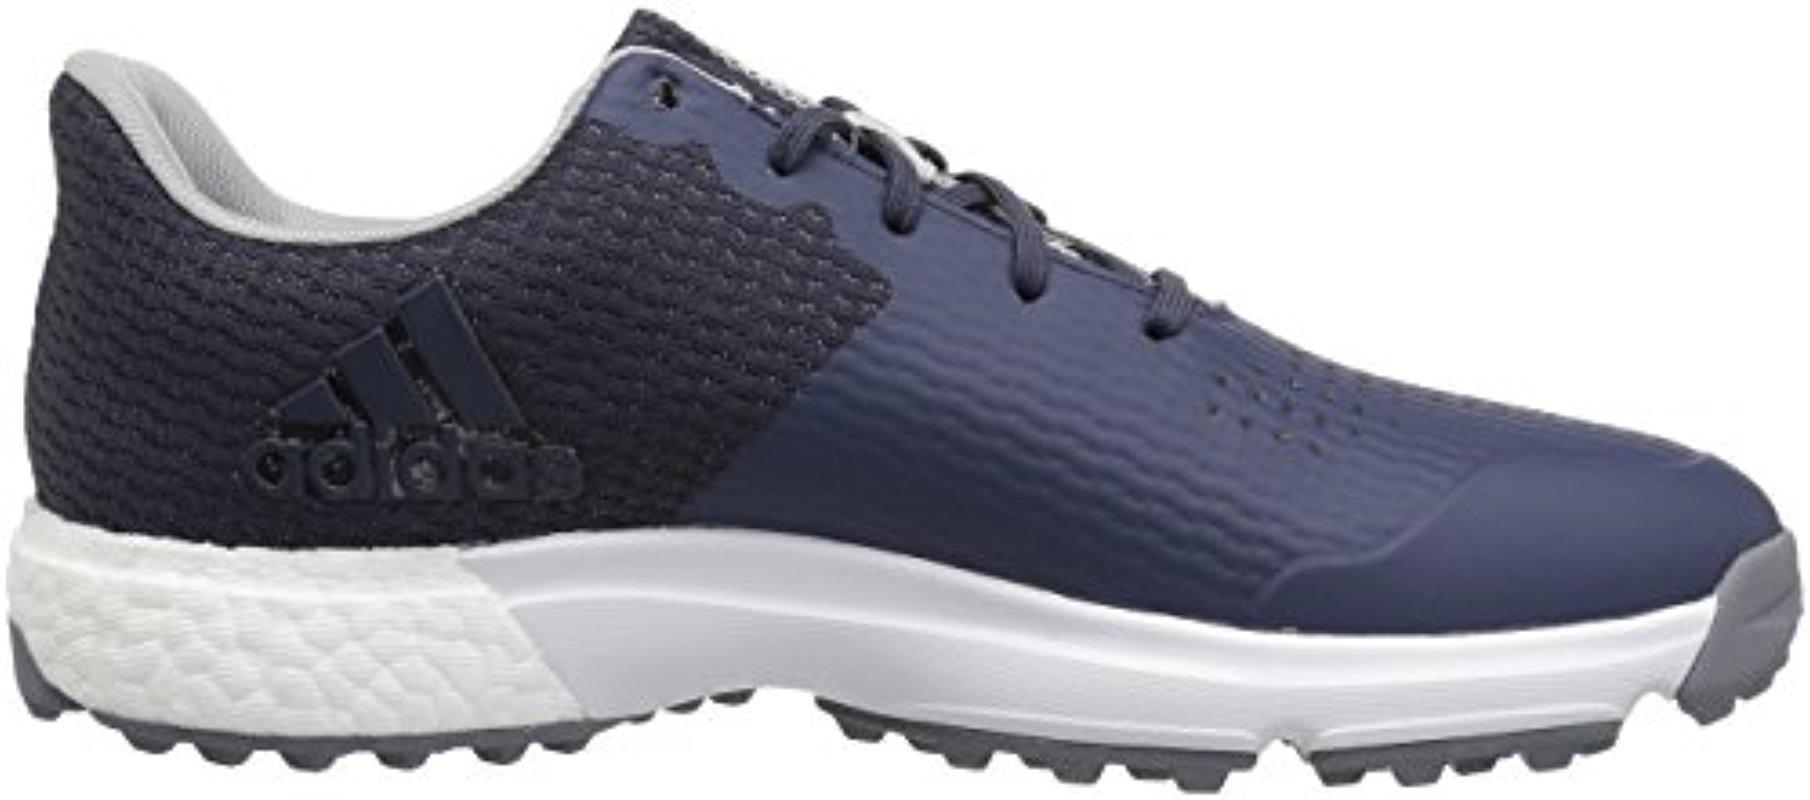 adidas Adipower S Boost 3 Golf Shoe in Blue for Men - Lyst